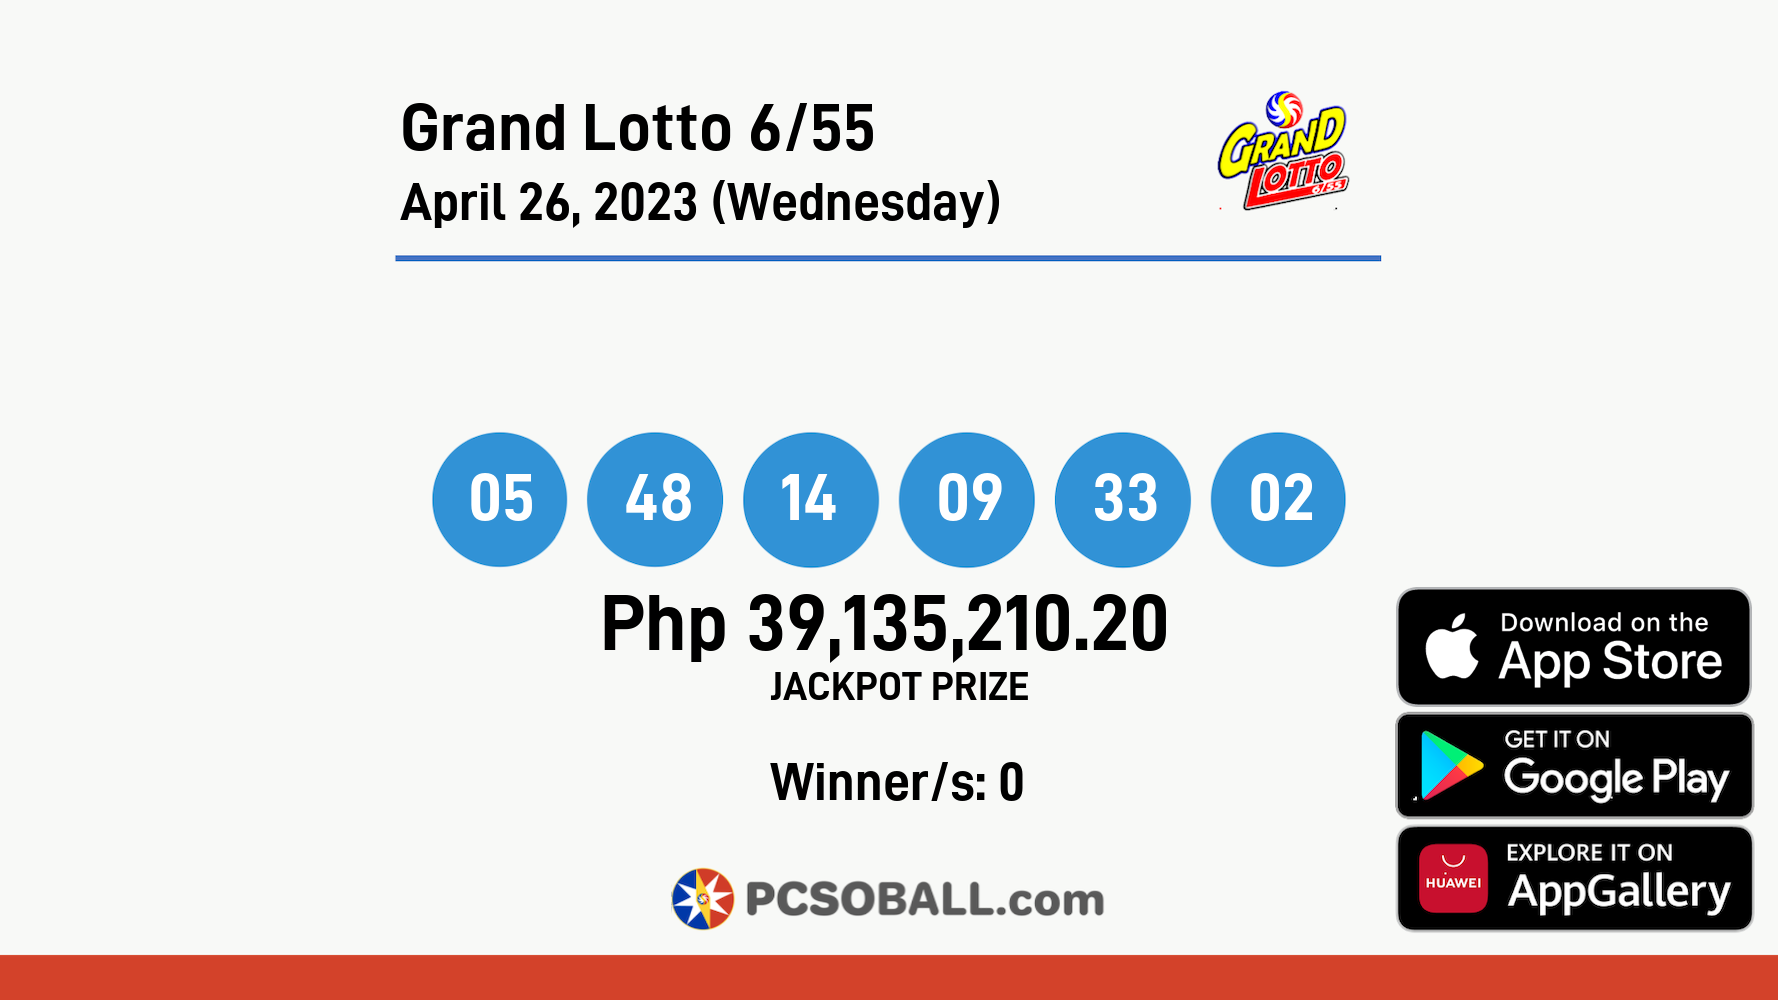 Grand Lotto 6/55 April 26, 2023 (Wednesday) Result